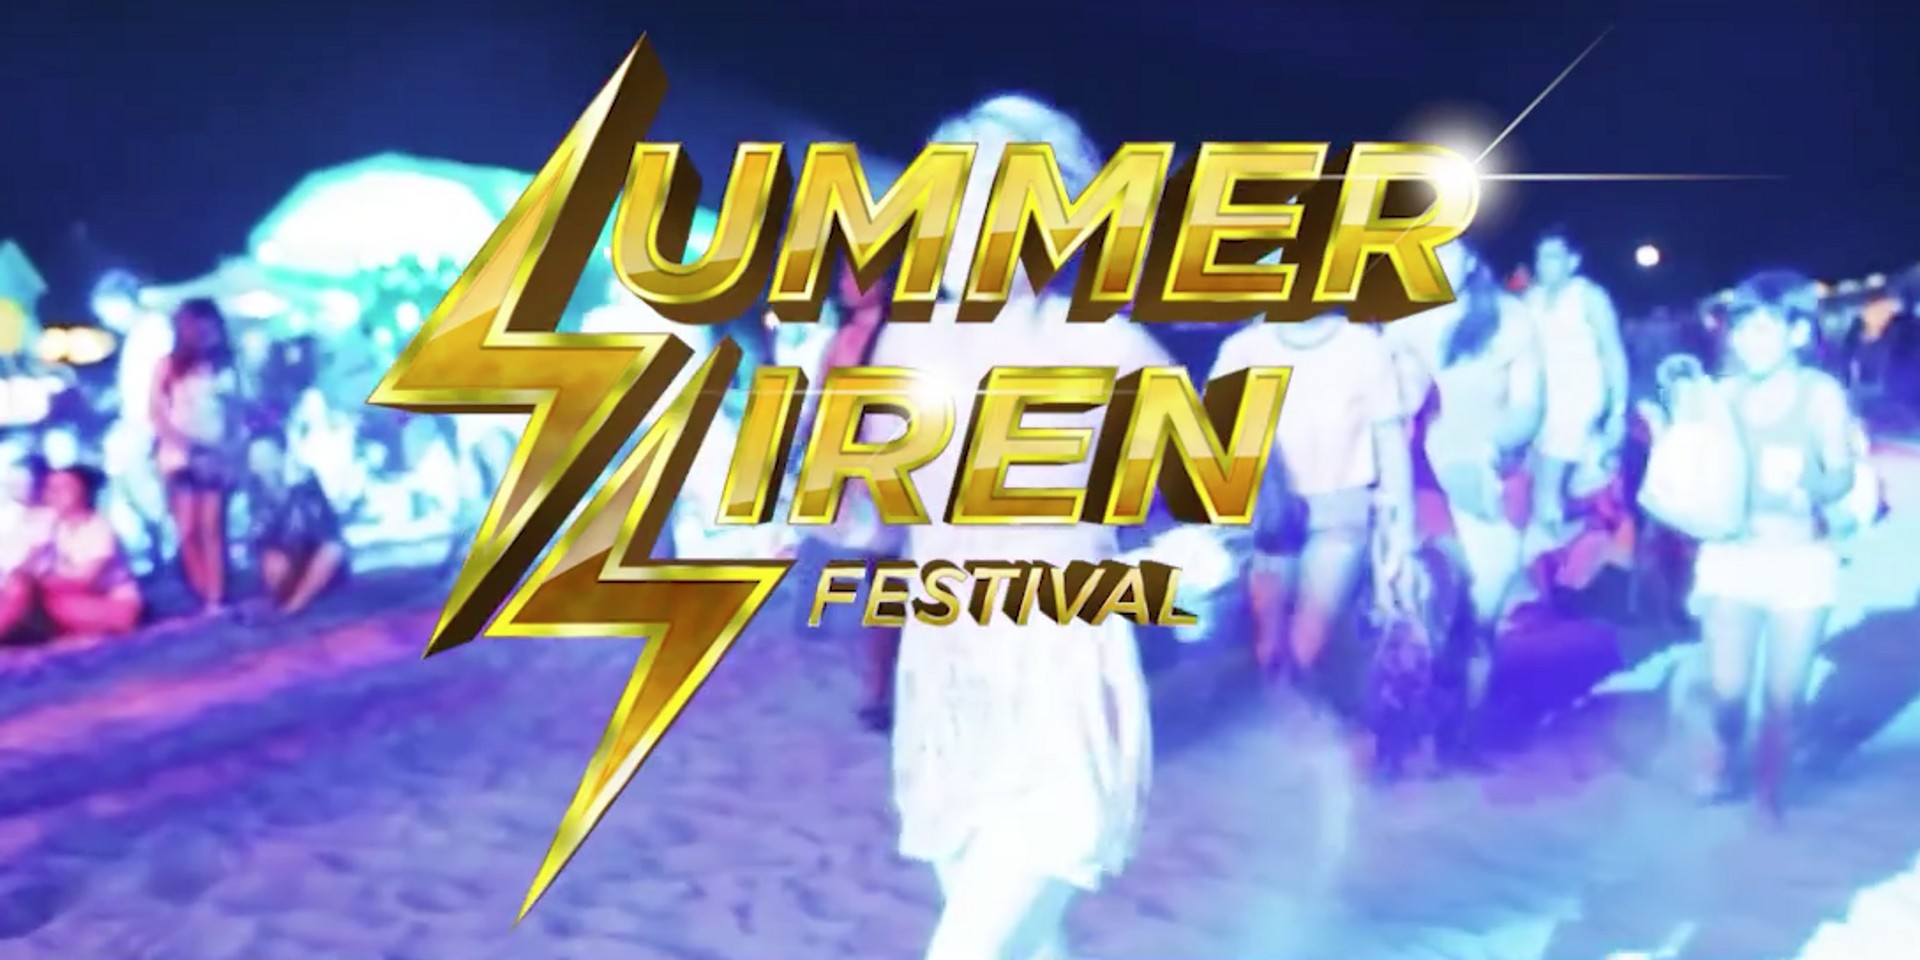 Summer Siren Festival moves to their new home in Subic